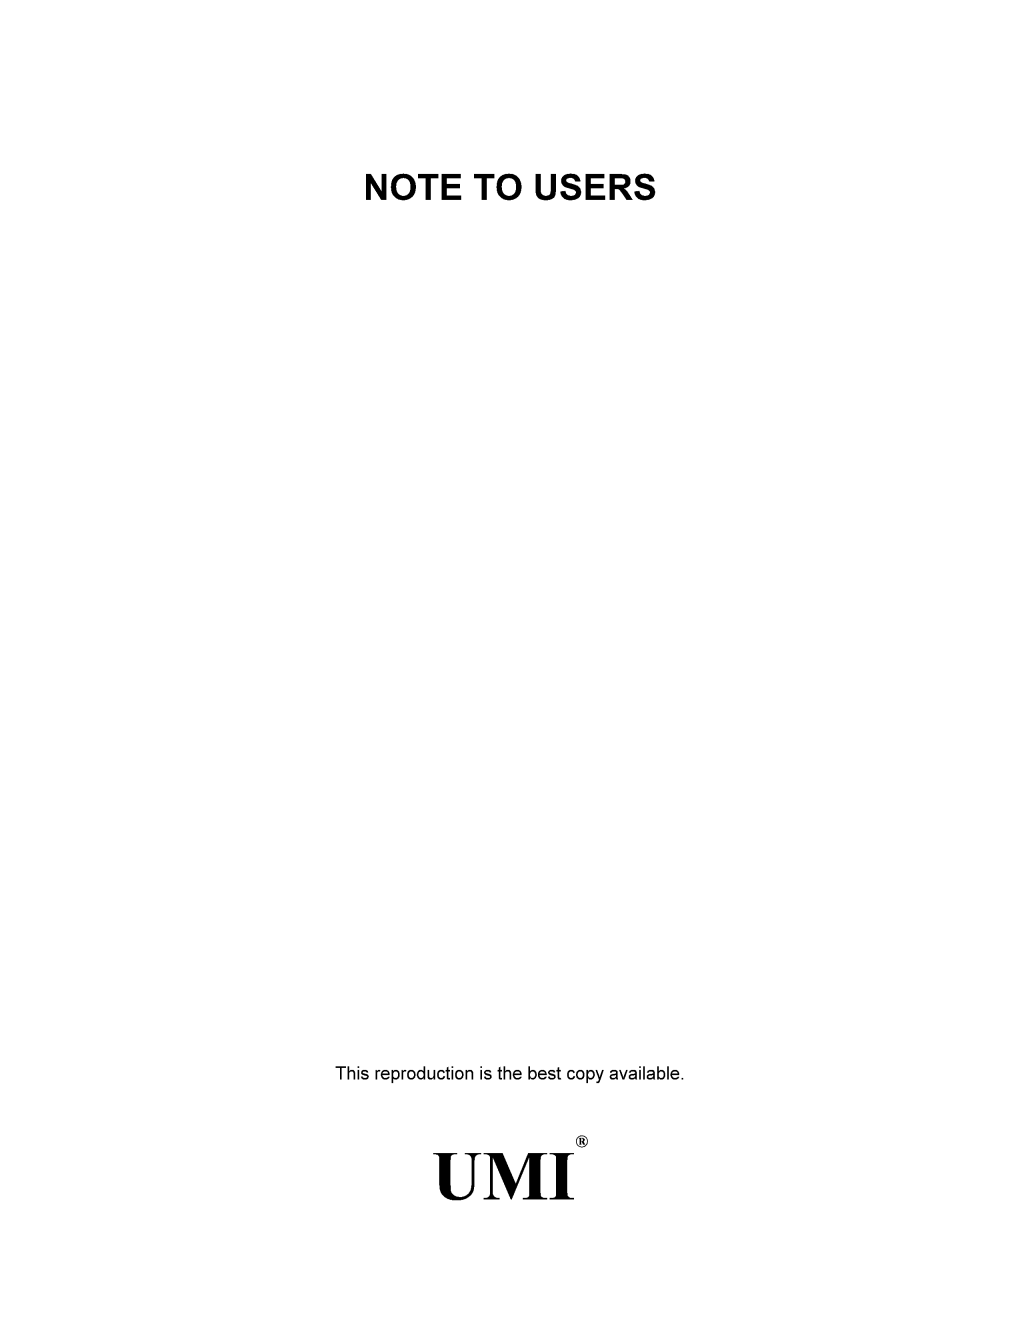 Note to Users